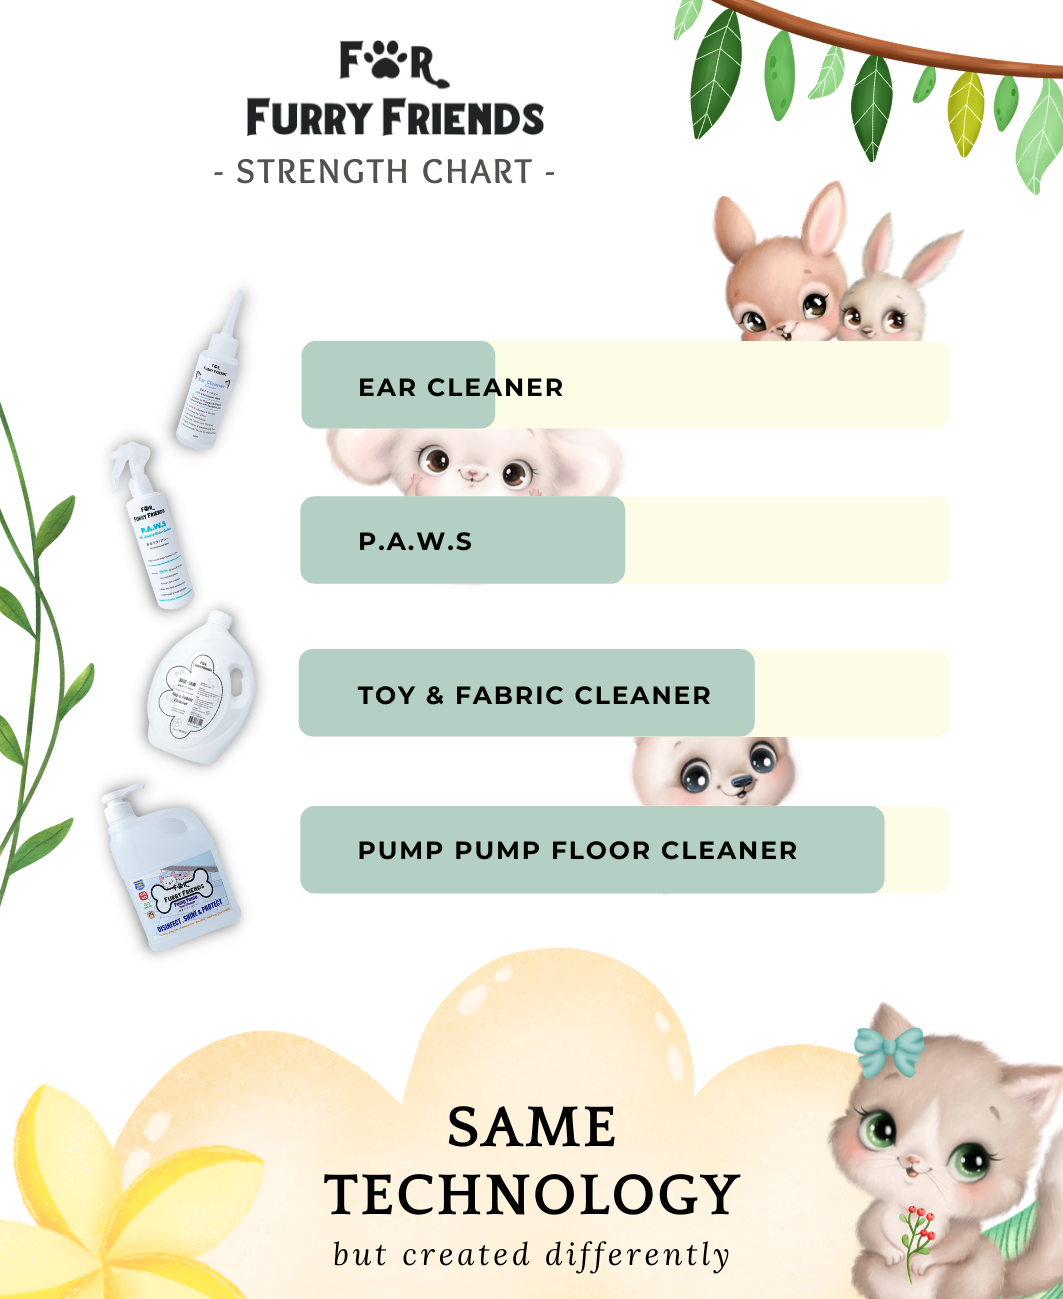 FOR FURRY FRIENDS Toy & Fabric Cleaner